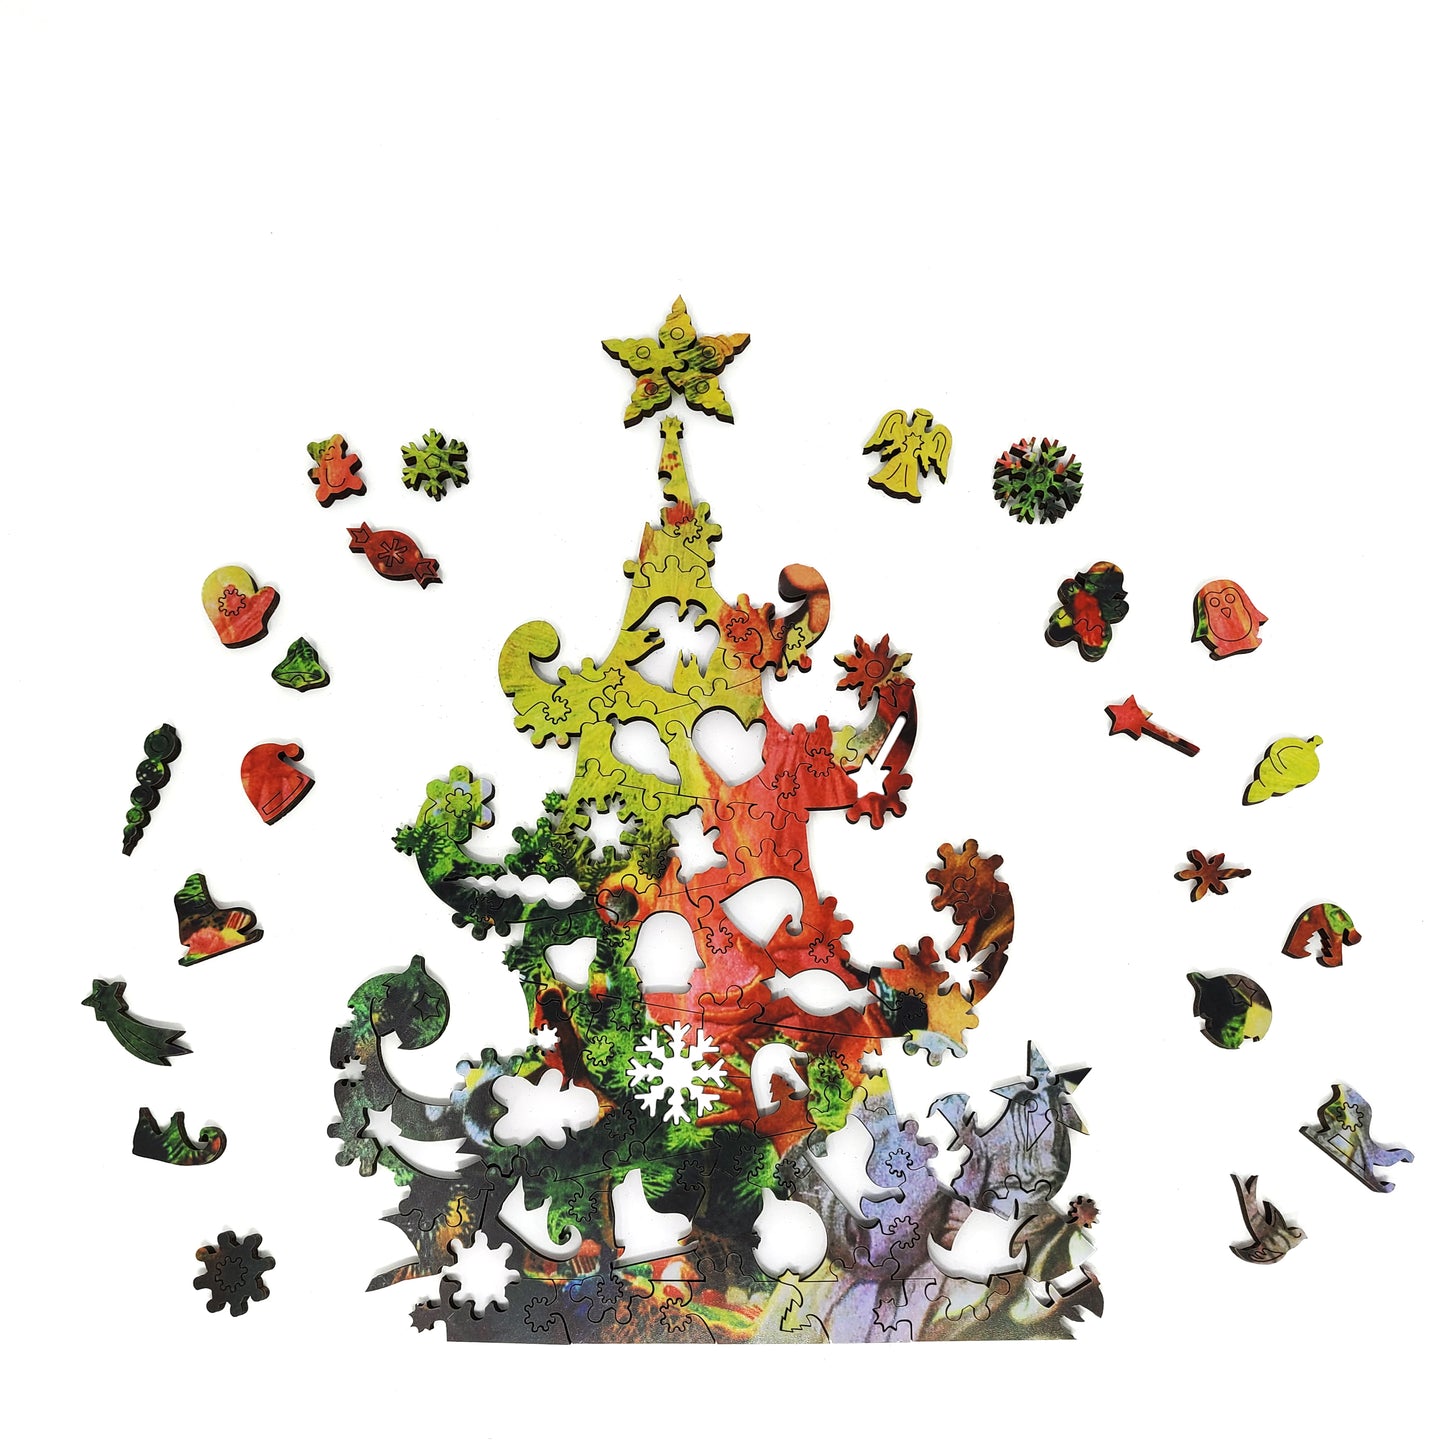 Wooden Jigsaw Puzzle with Uniquely Shaped Pieces for Adults - 198 Pieces - The Fairy of the Christmas Tree